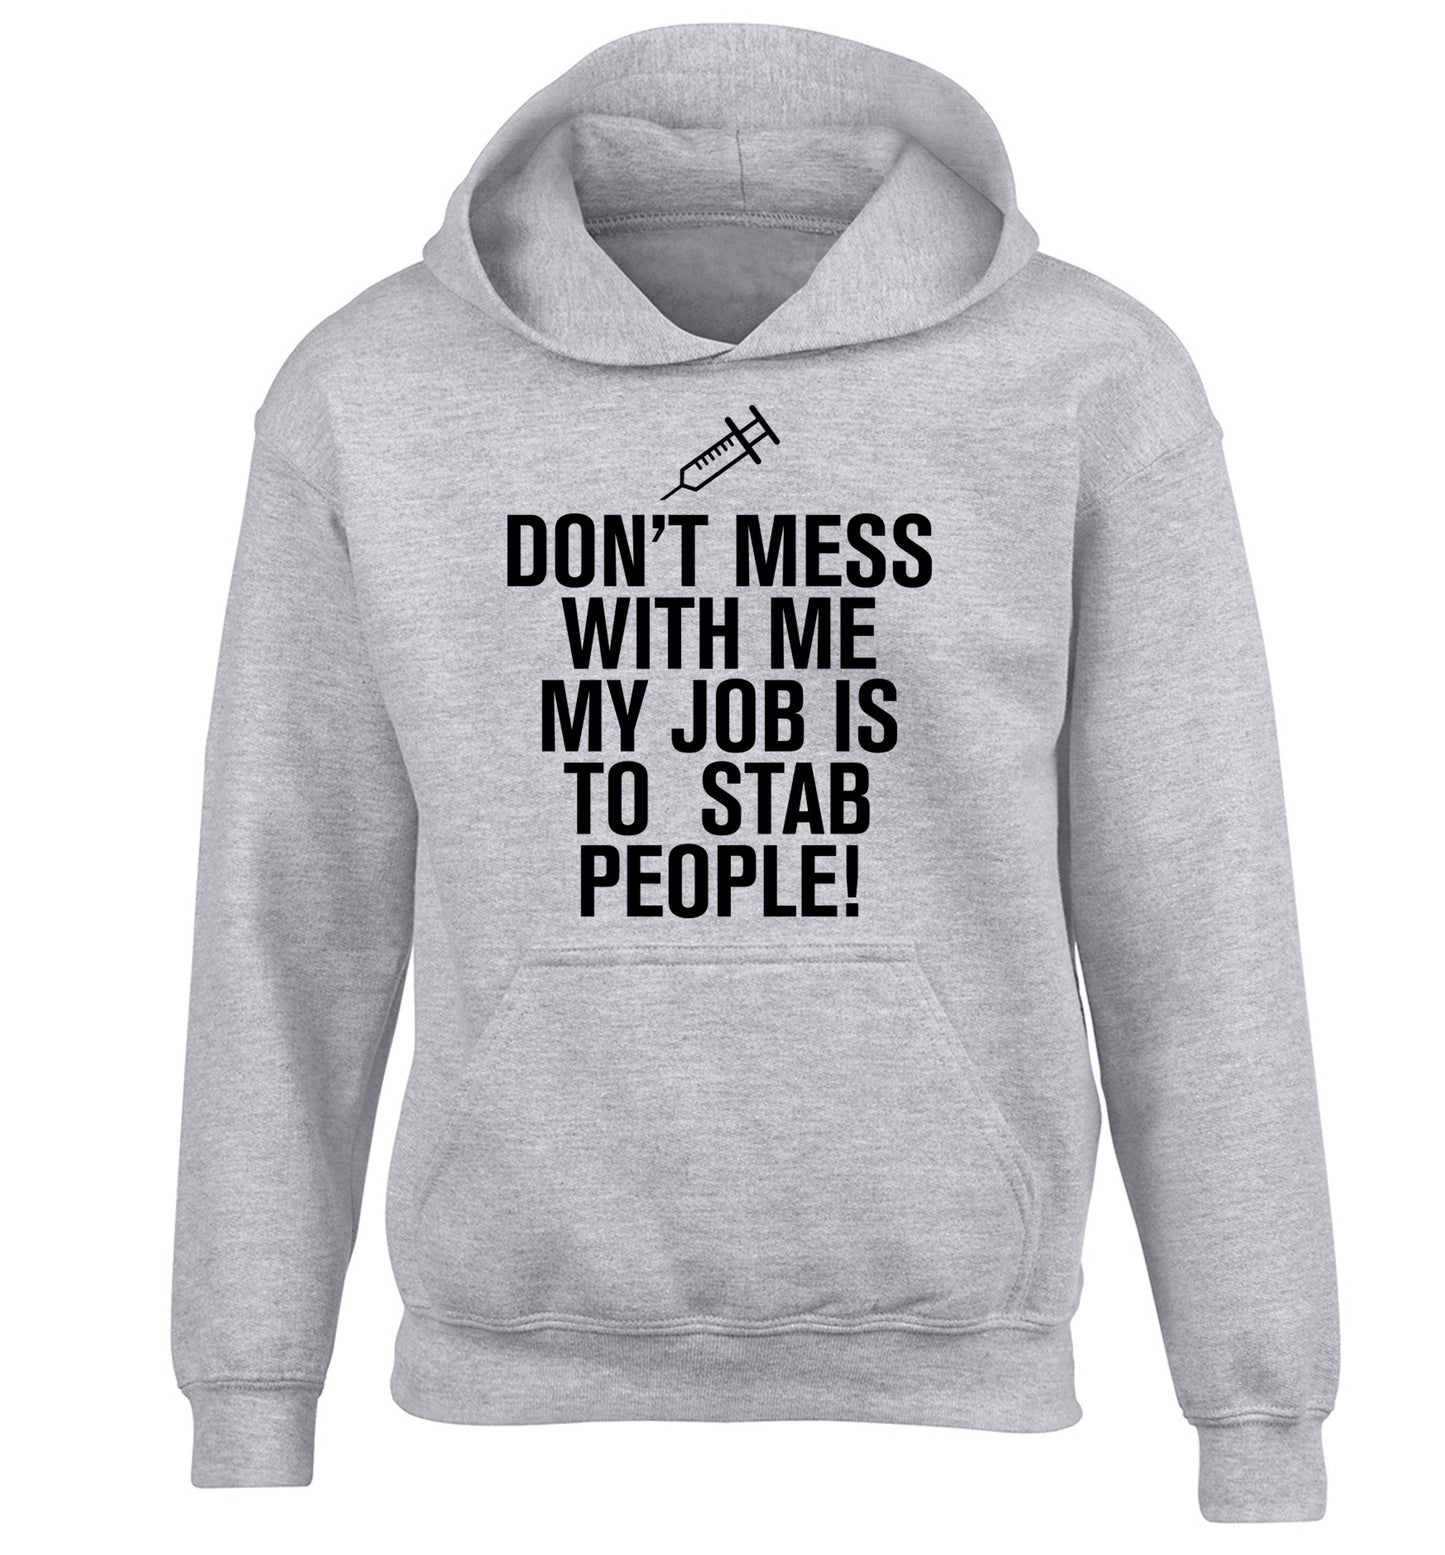 Don't mess with me my job is to stab people! children's grey hoodie 12-14 Years